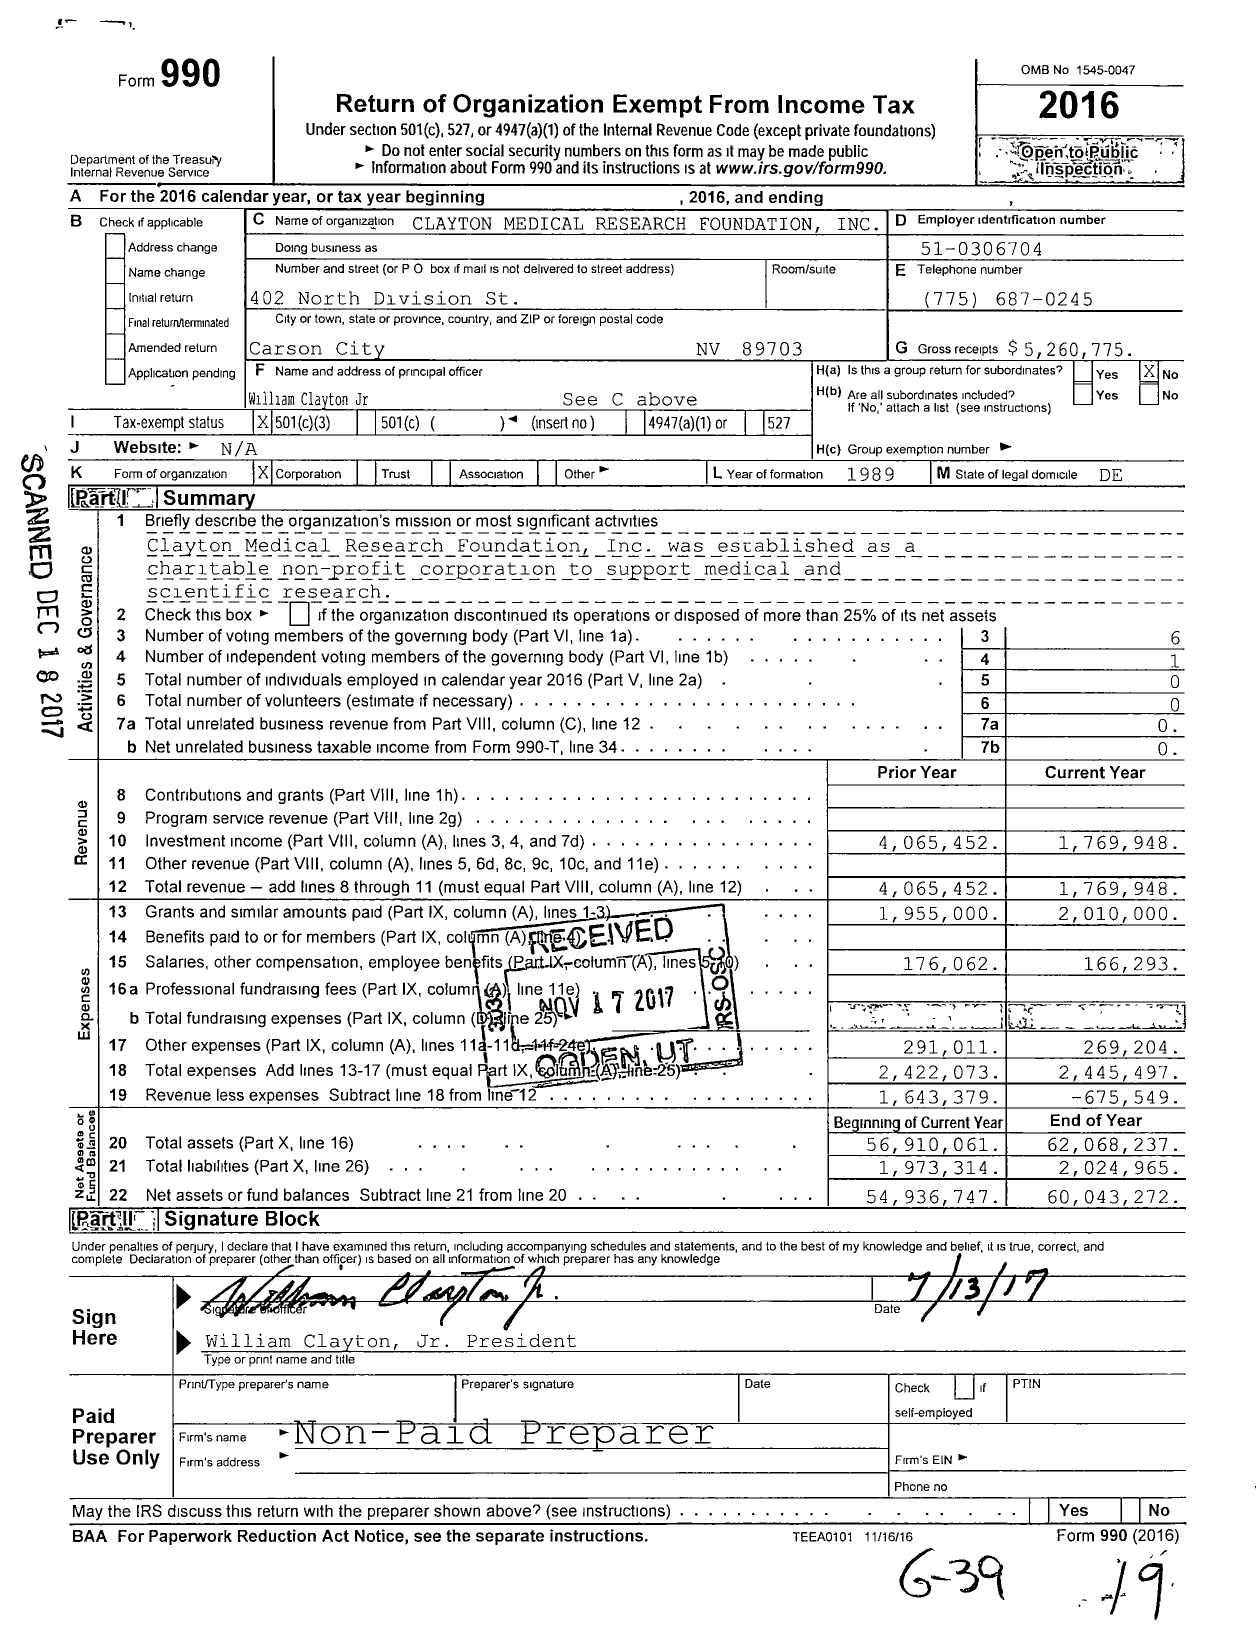 Image of first page of 2016 Form 990 for Clayton Medical Research Foundation